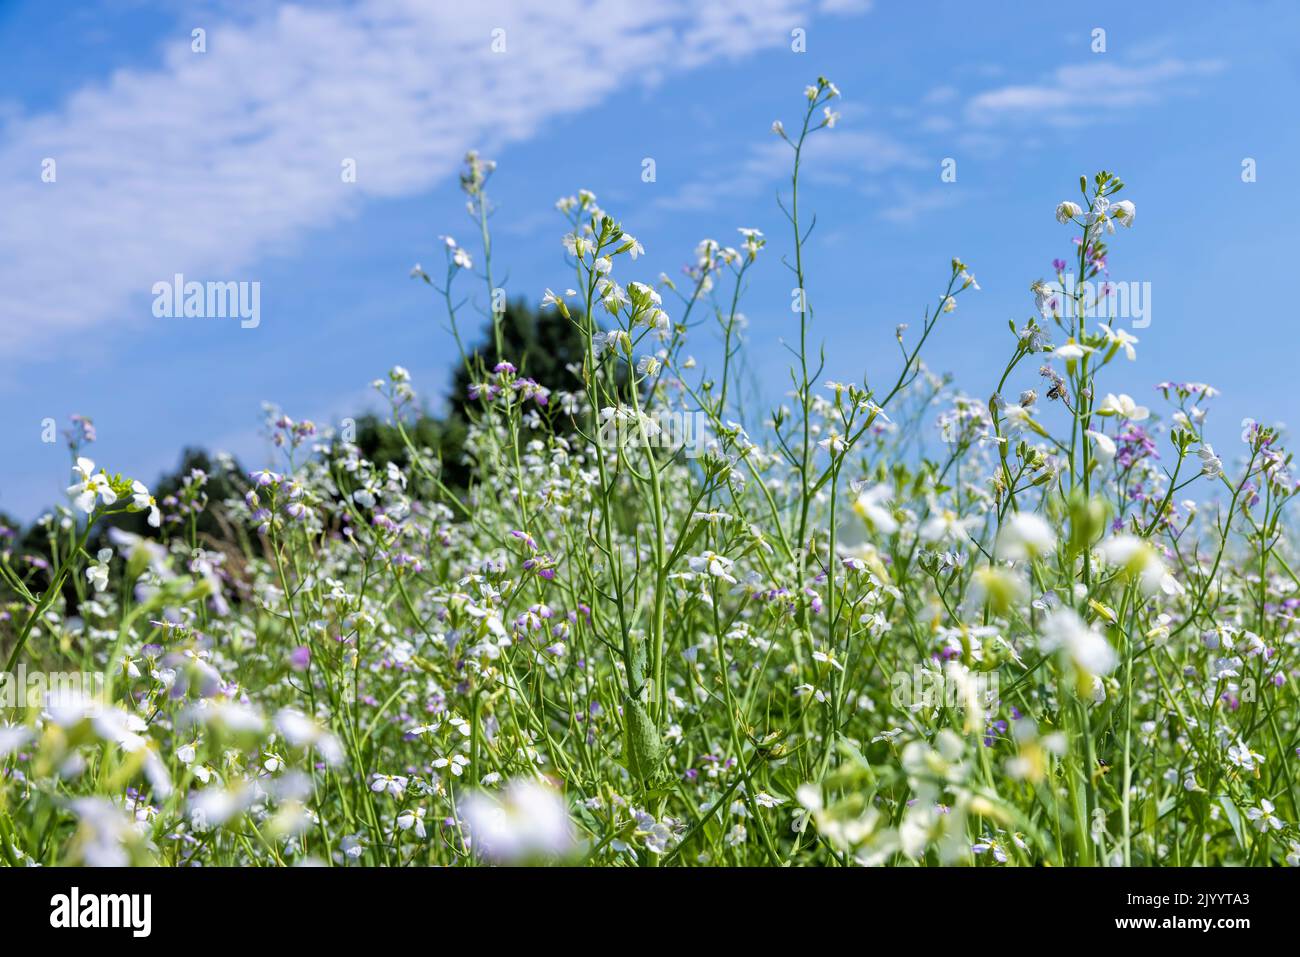 Agricultural field with white flowers for honey, flowers grown for food Stock Photo